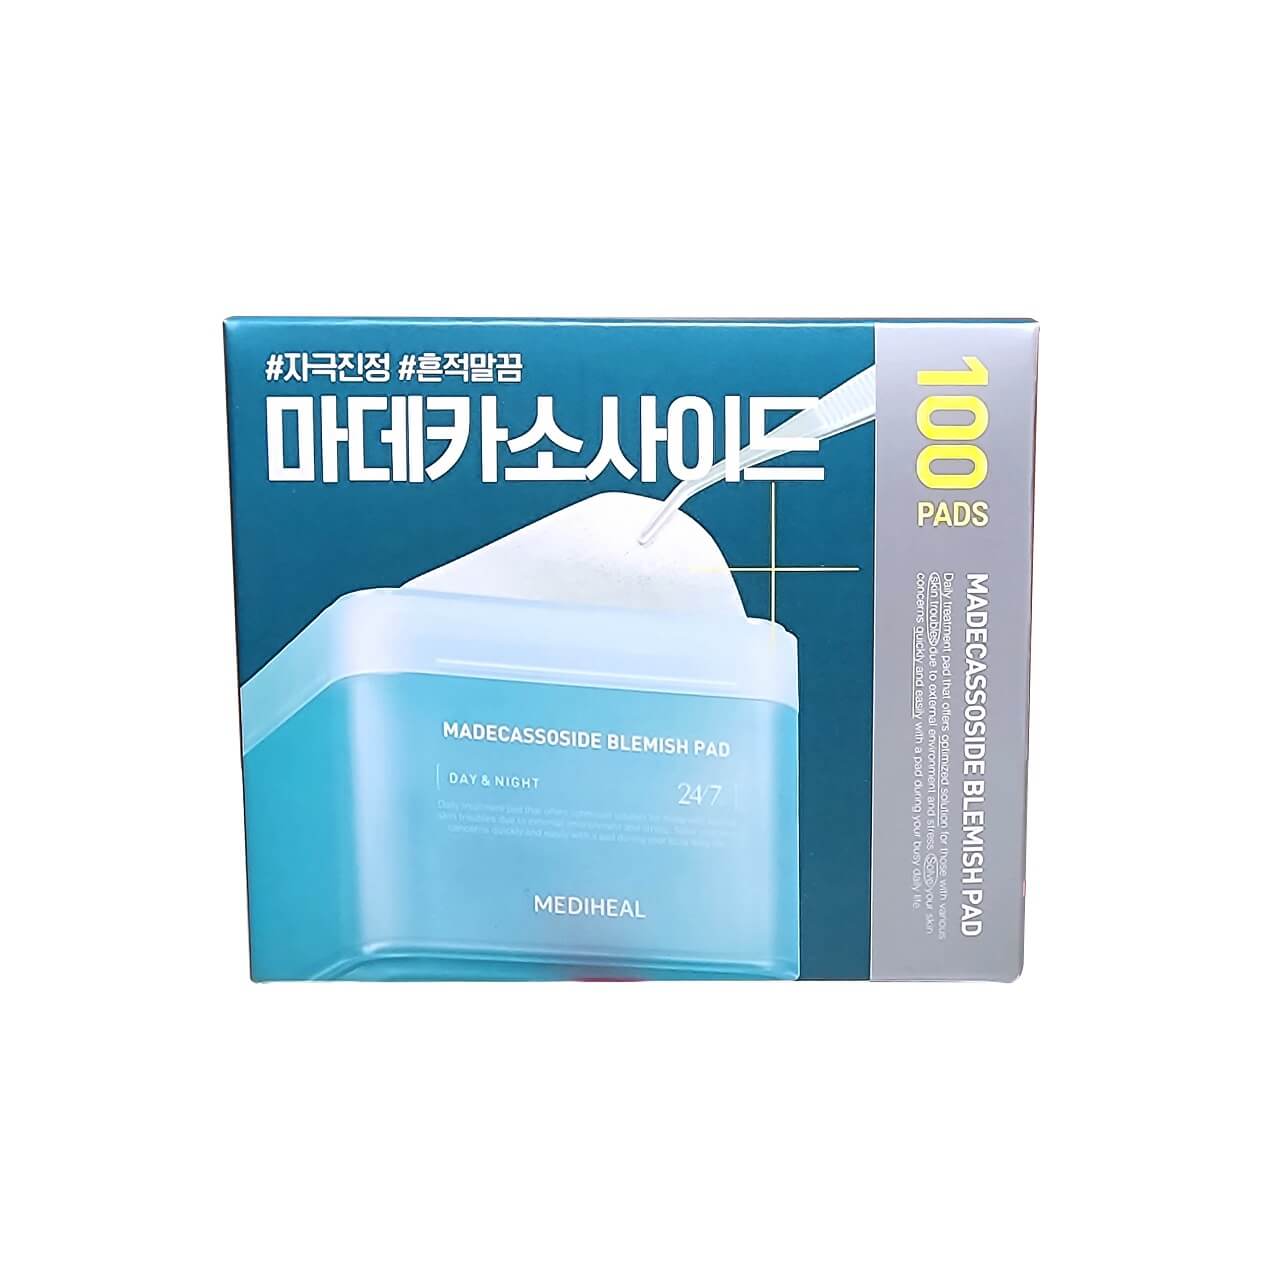 Product label for Mediheal Madecassoside Blemish Pad (100 count)